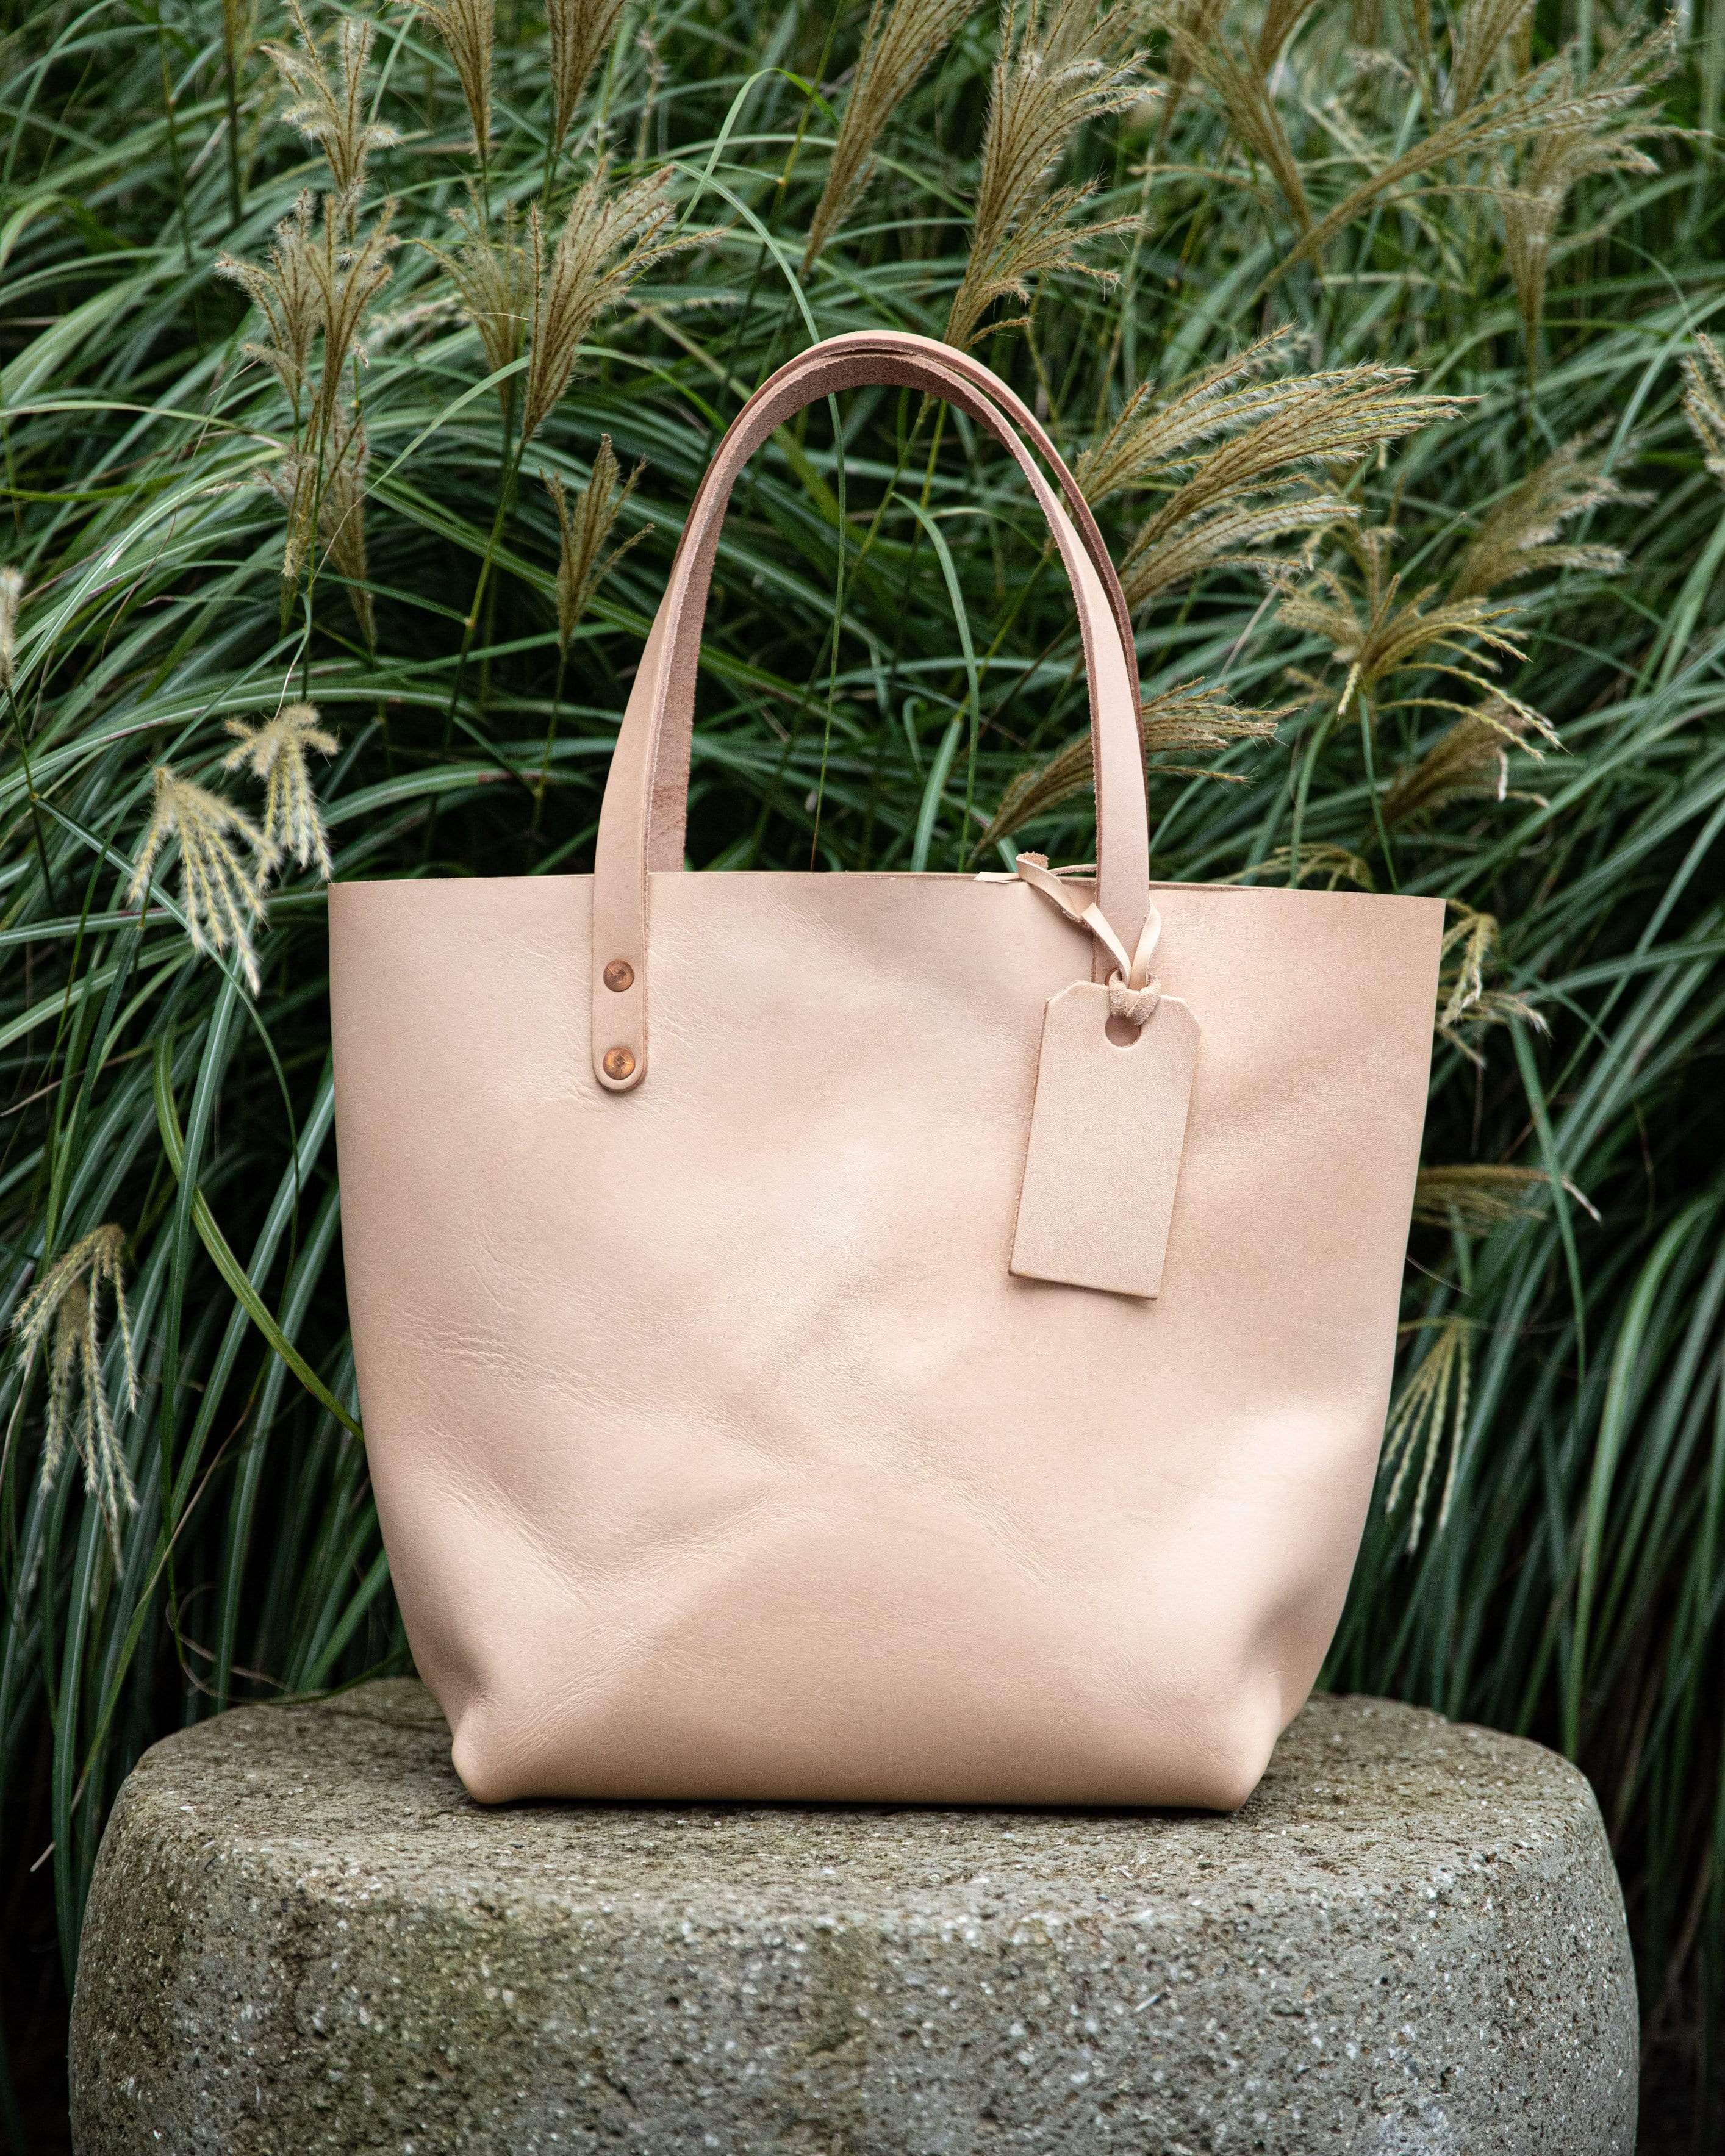 Nisolo - They're back! We just restocked your favorite bags in natural  vachetta. Natural vachetta leather is vegetable tanned leather with a  natural or unfinished surface that develops a patina over time.